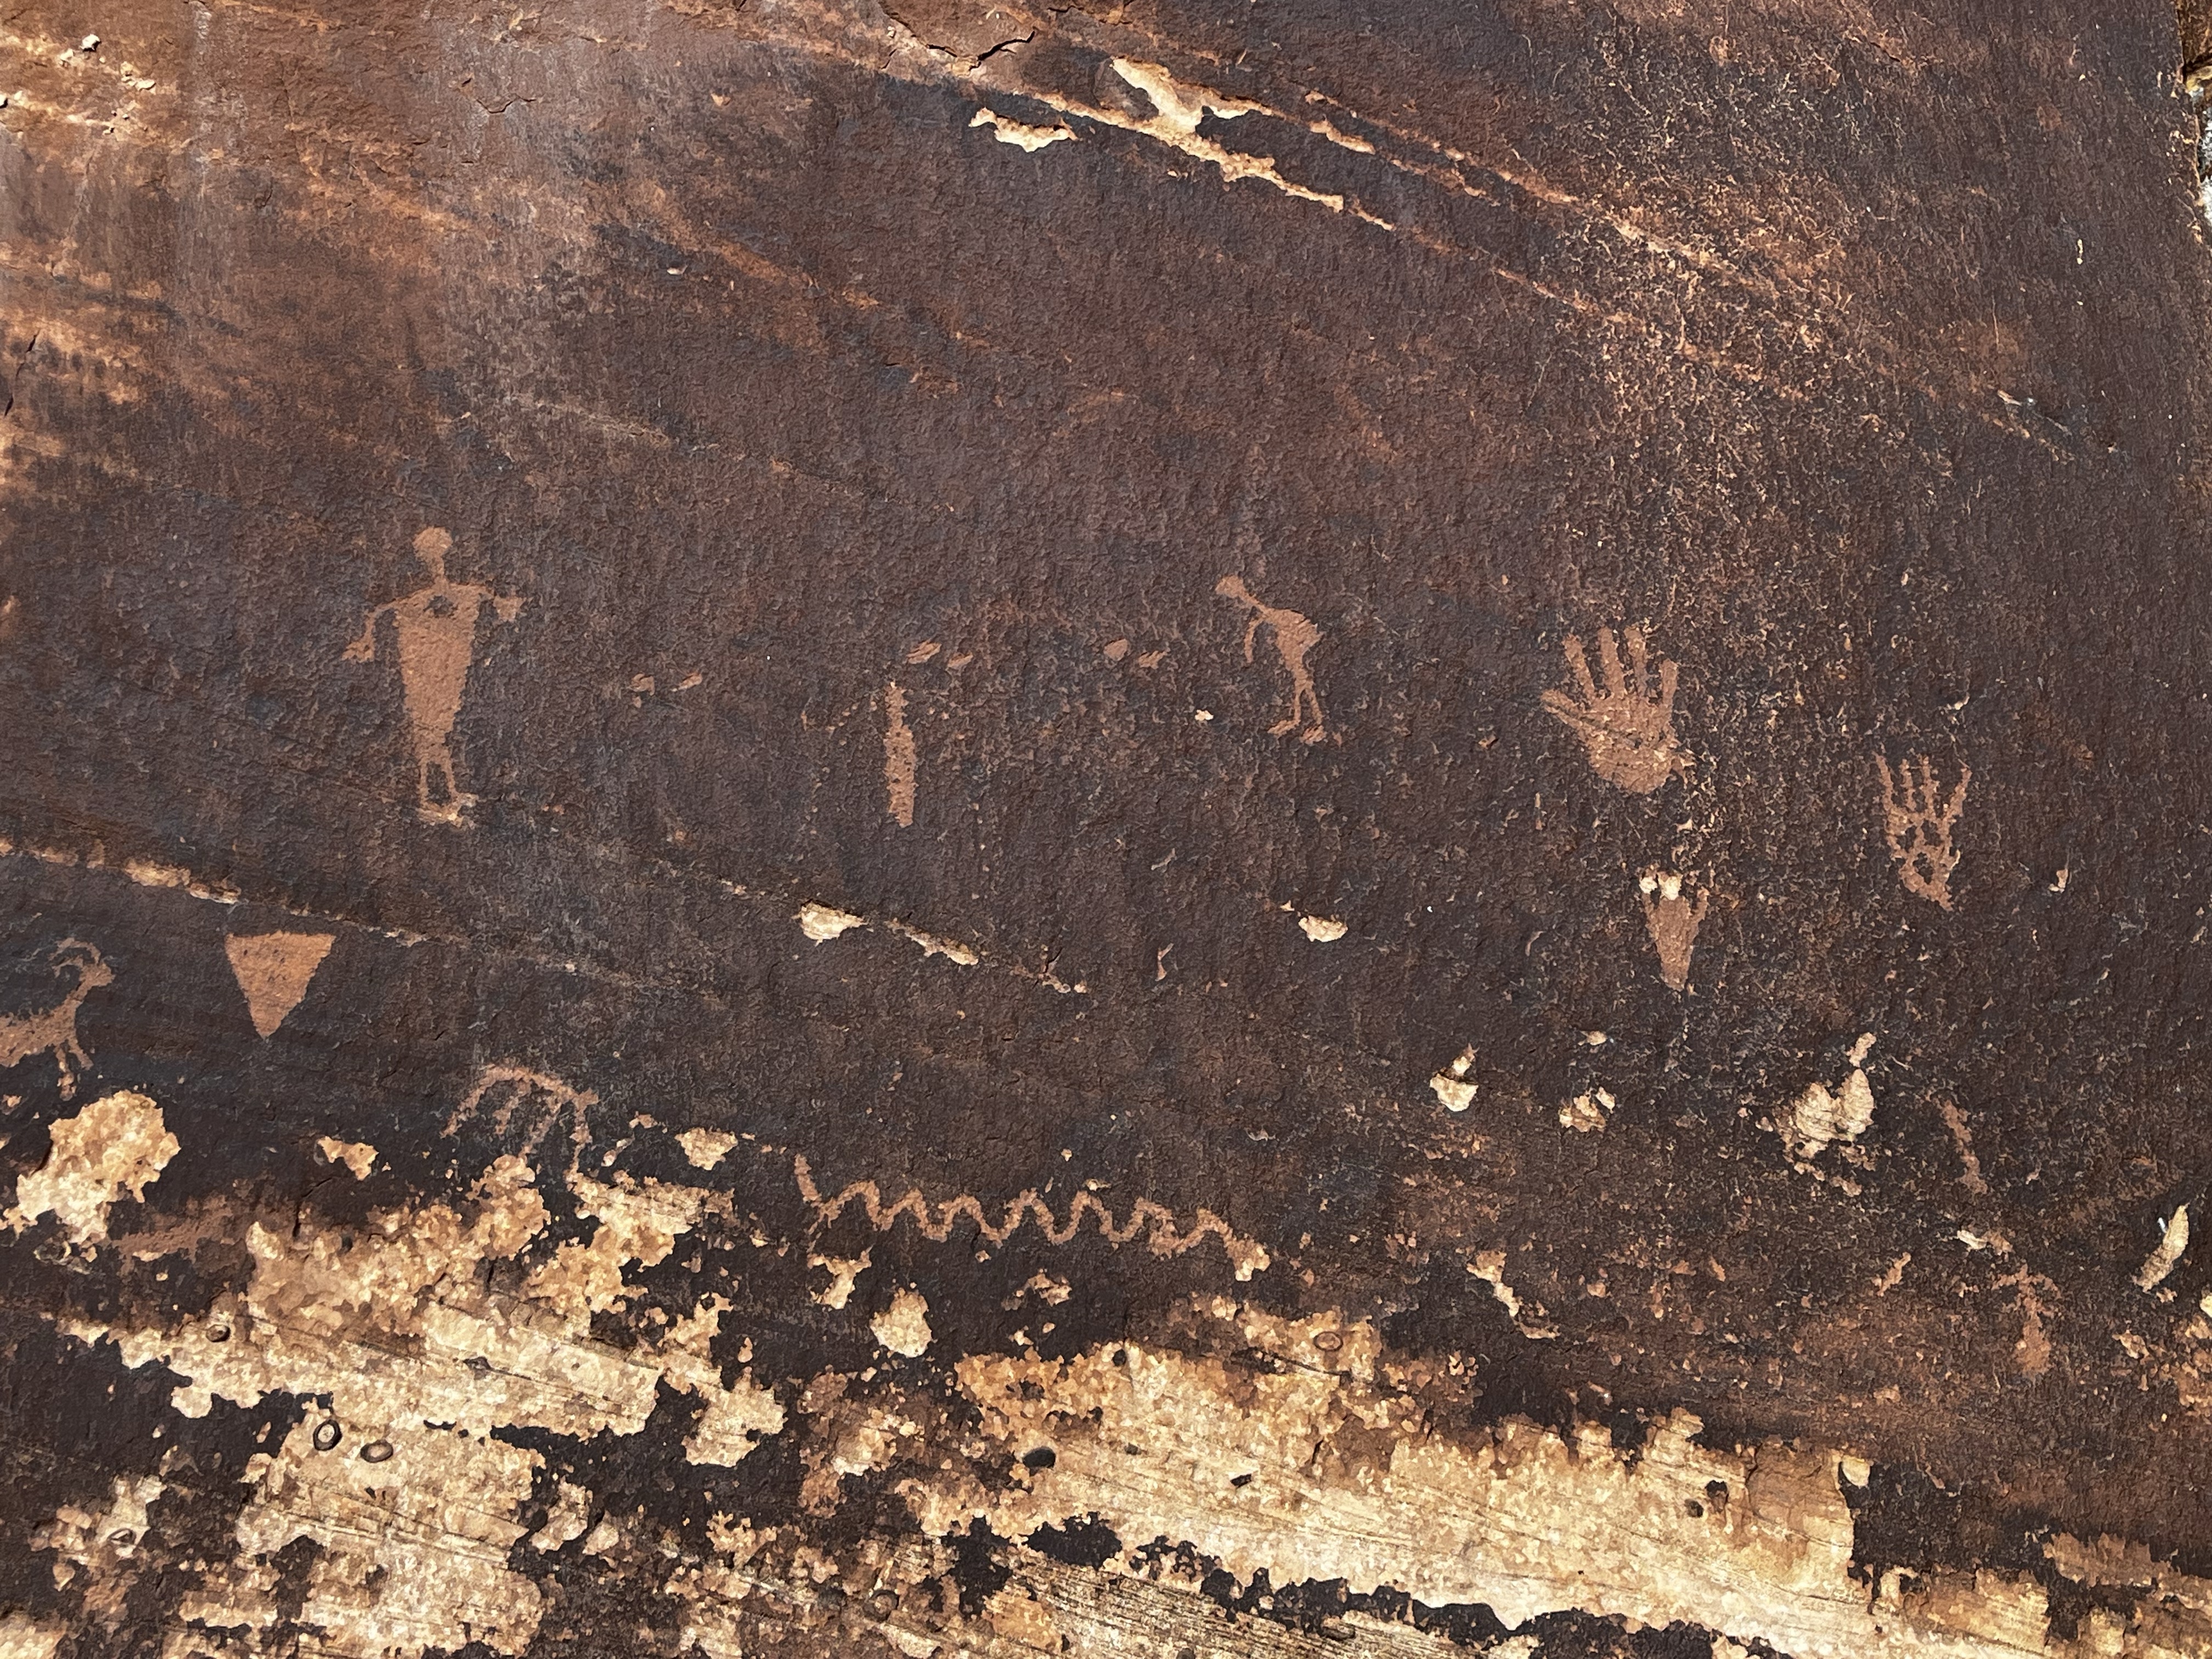 Primitive pictures carved into dark sandstone. Recoghnizeable figures include a person, a Kokopelli, handprints, and depictions of antelope or similar animals. There are also abstract shapes, including a triangle and a snake-like squiggle.